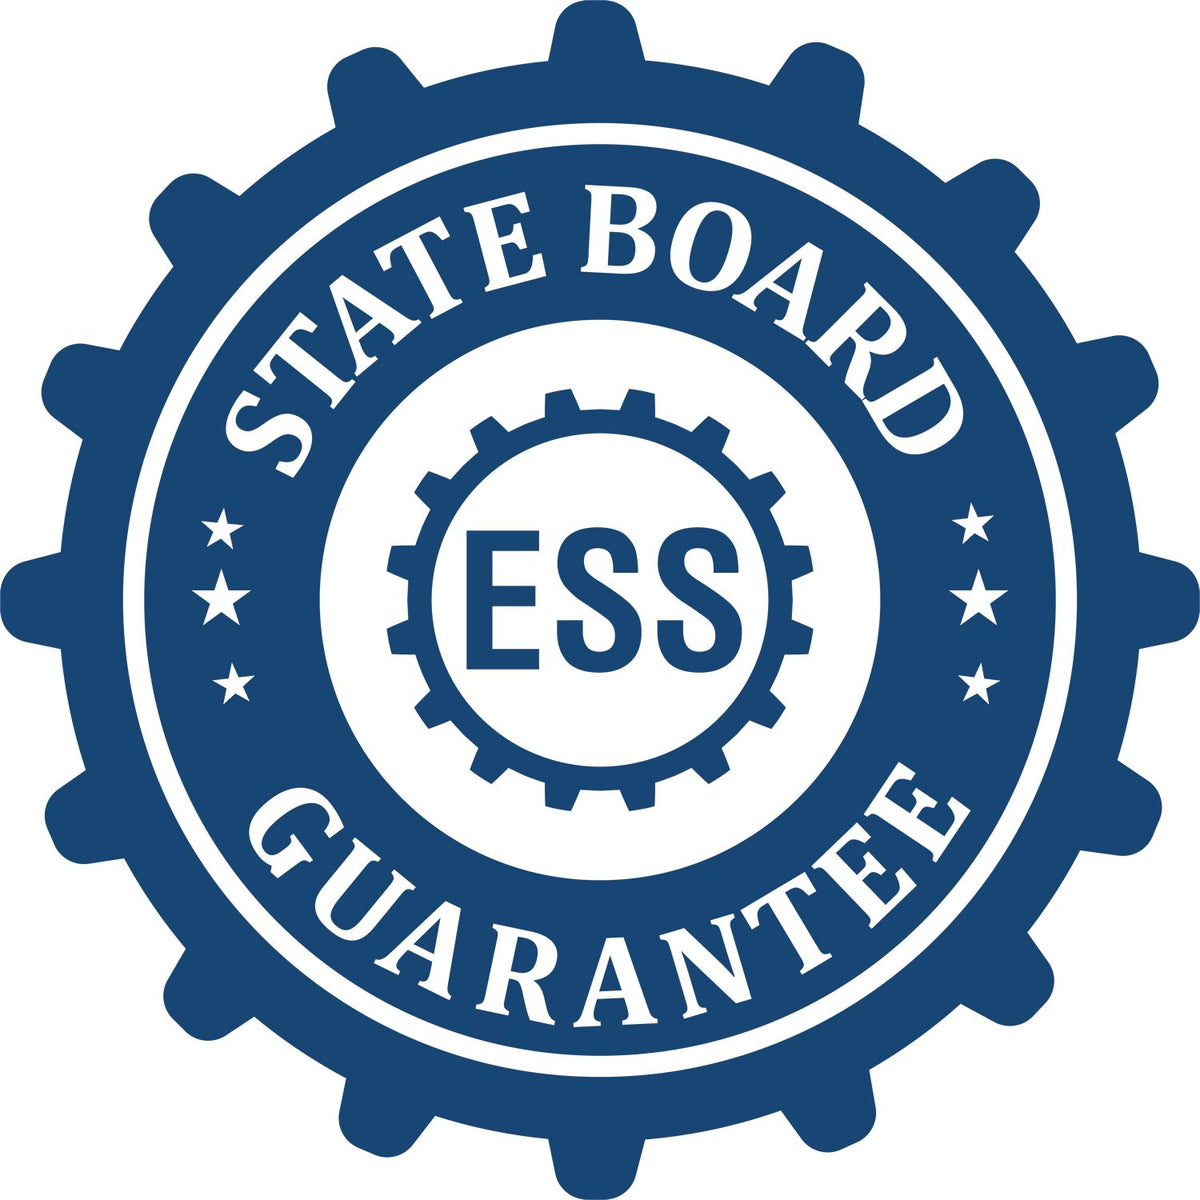 An emblem in a gear shape illustrating a state board guarantee for the Alaska Engineer Desk Seal product.